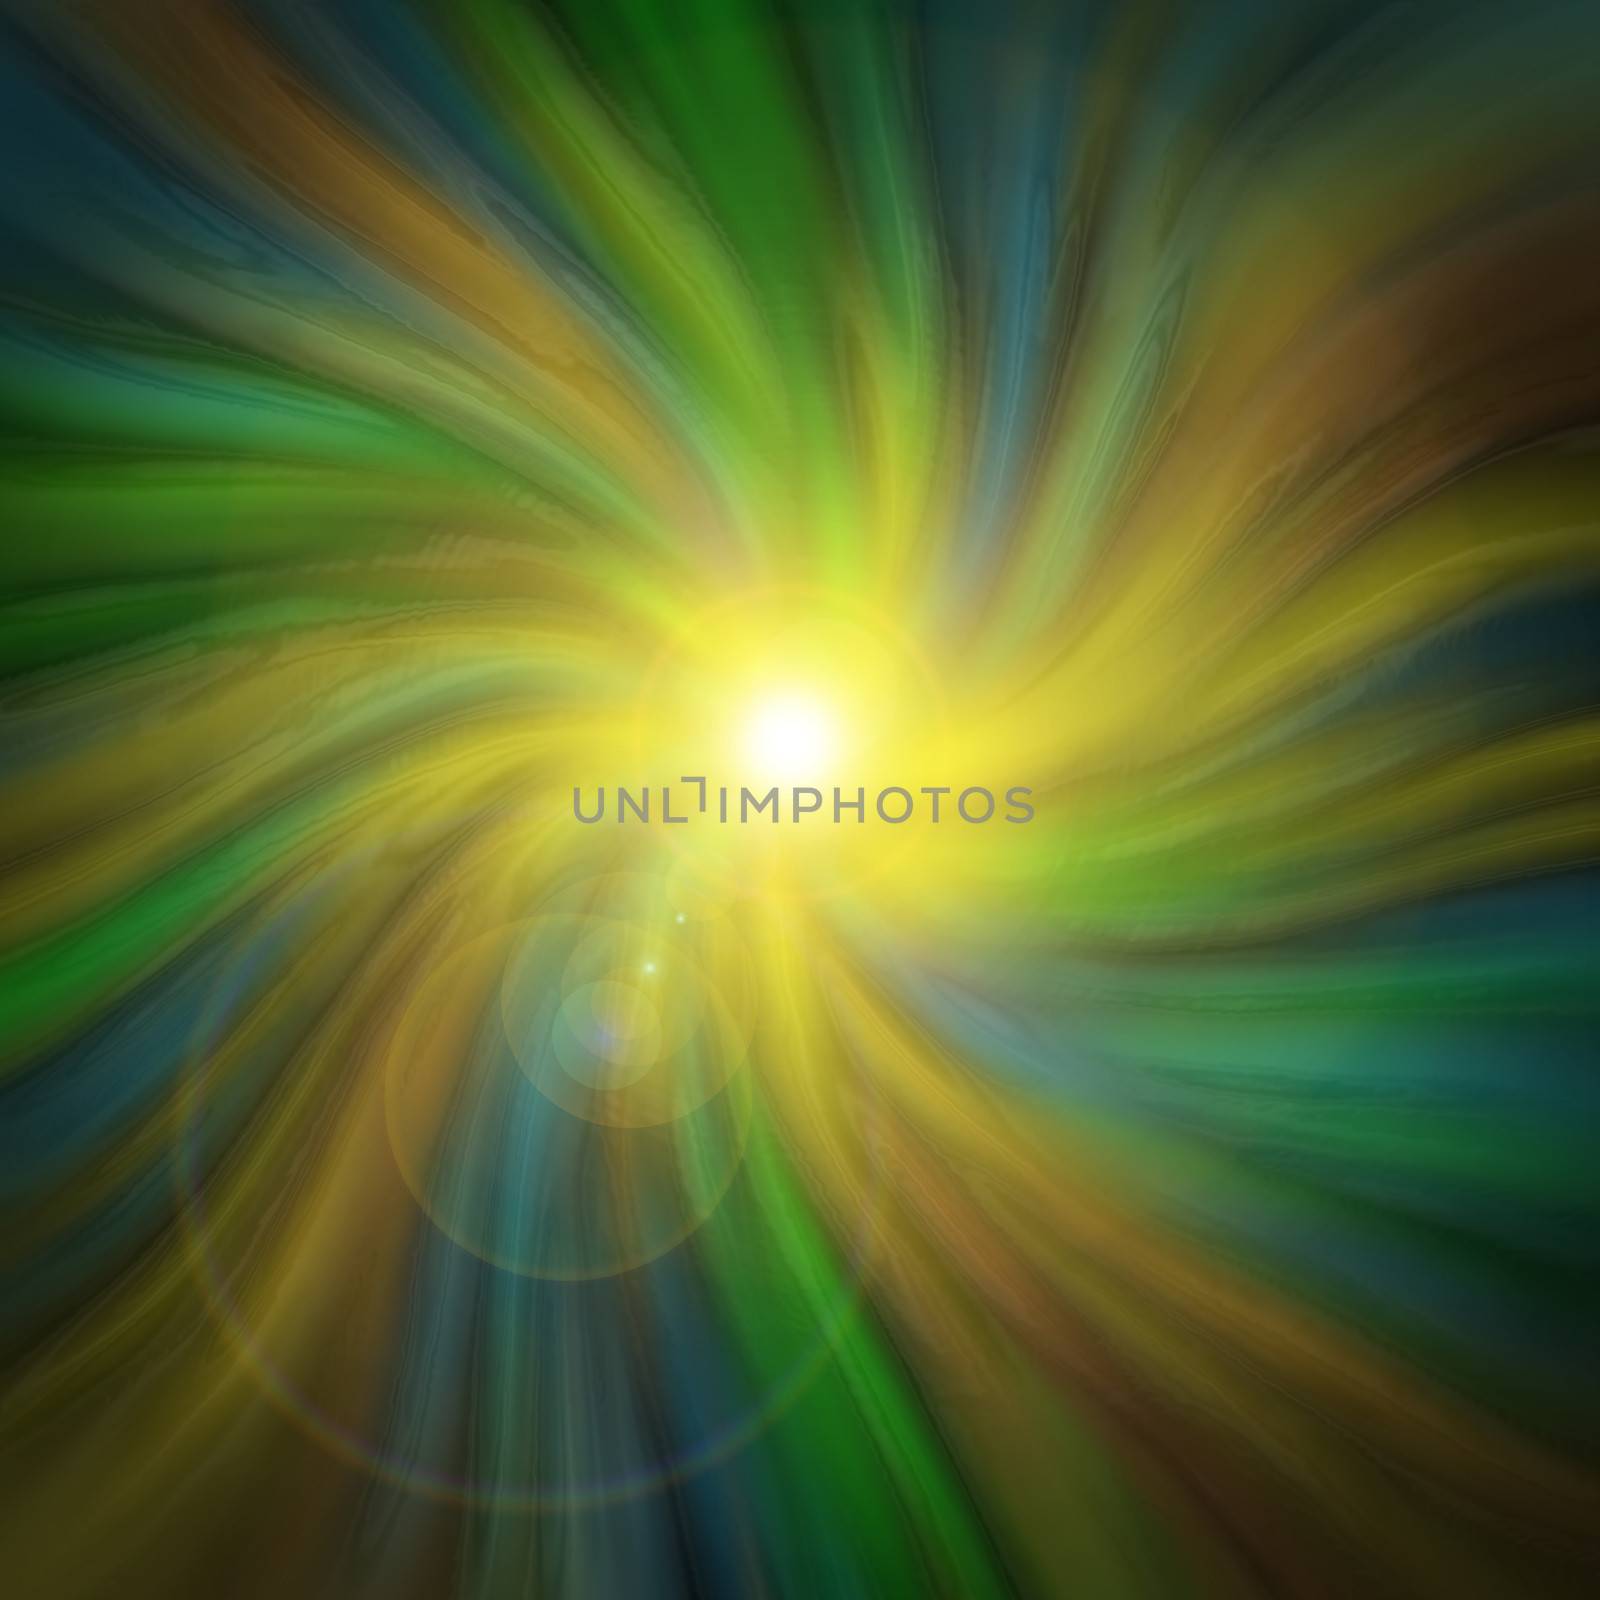 Swirling pastel vortex with lens flare